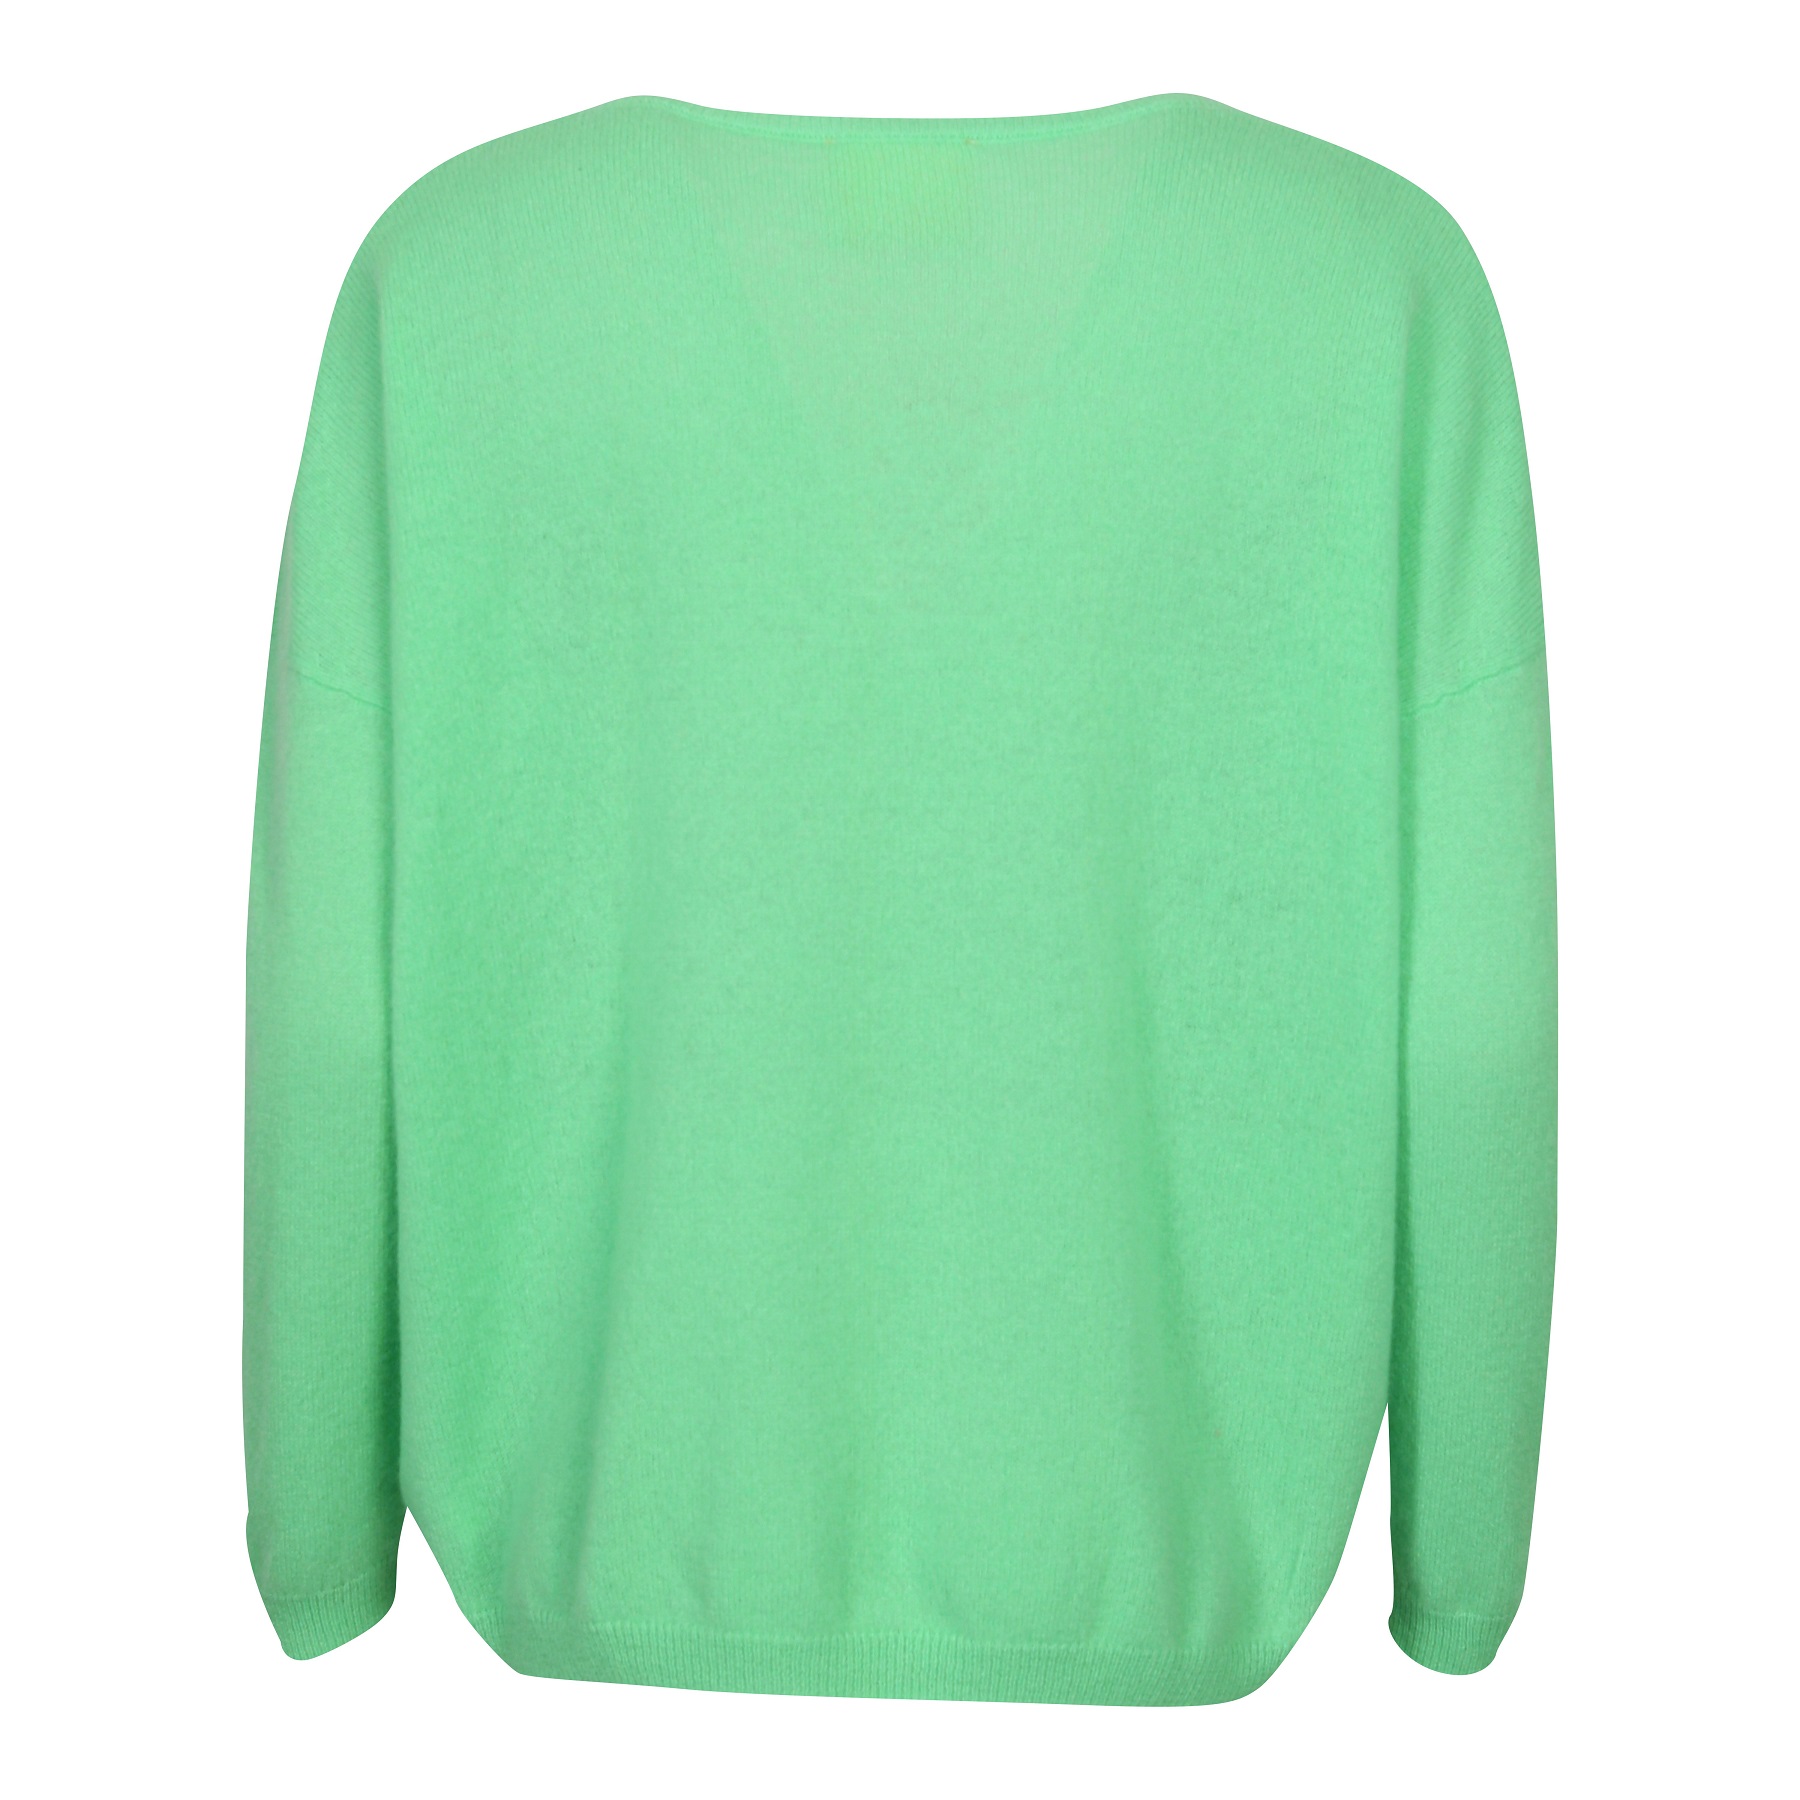 Absolut Cashmere Pullover Angele in Light Green S